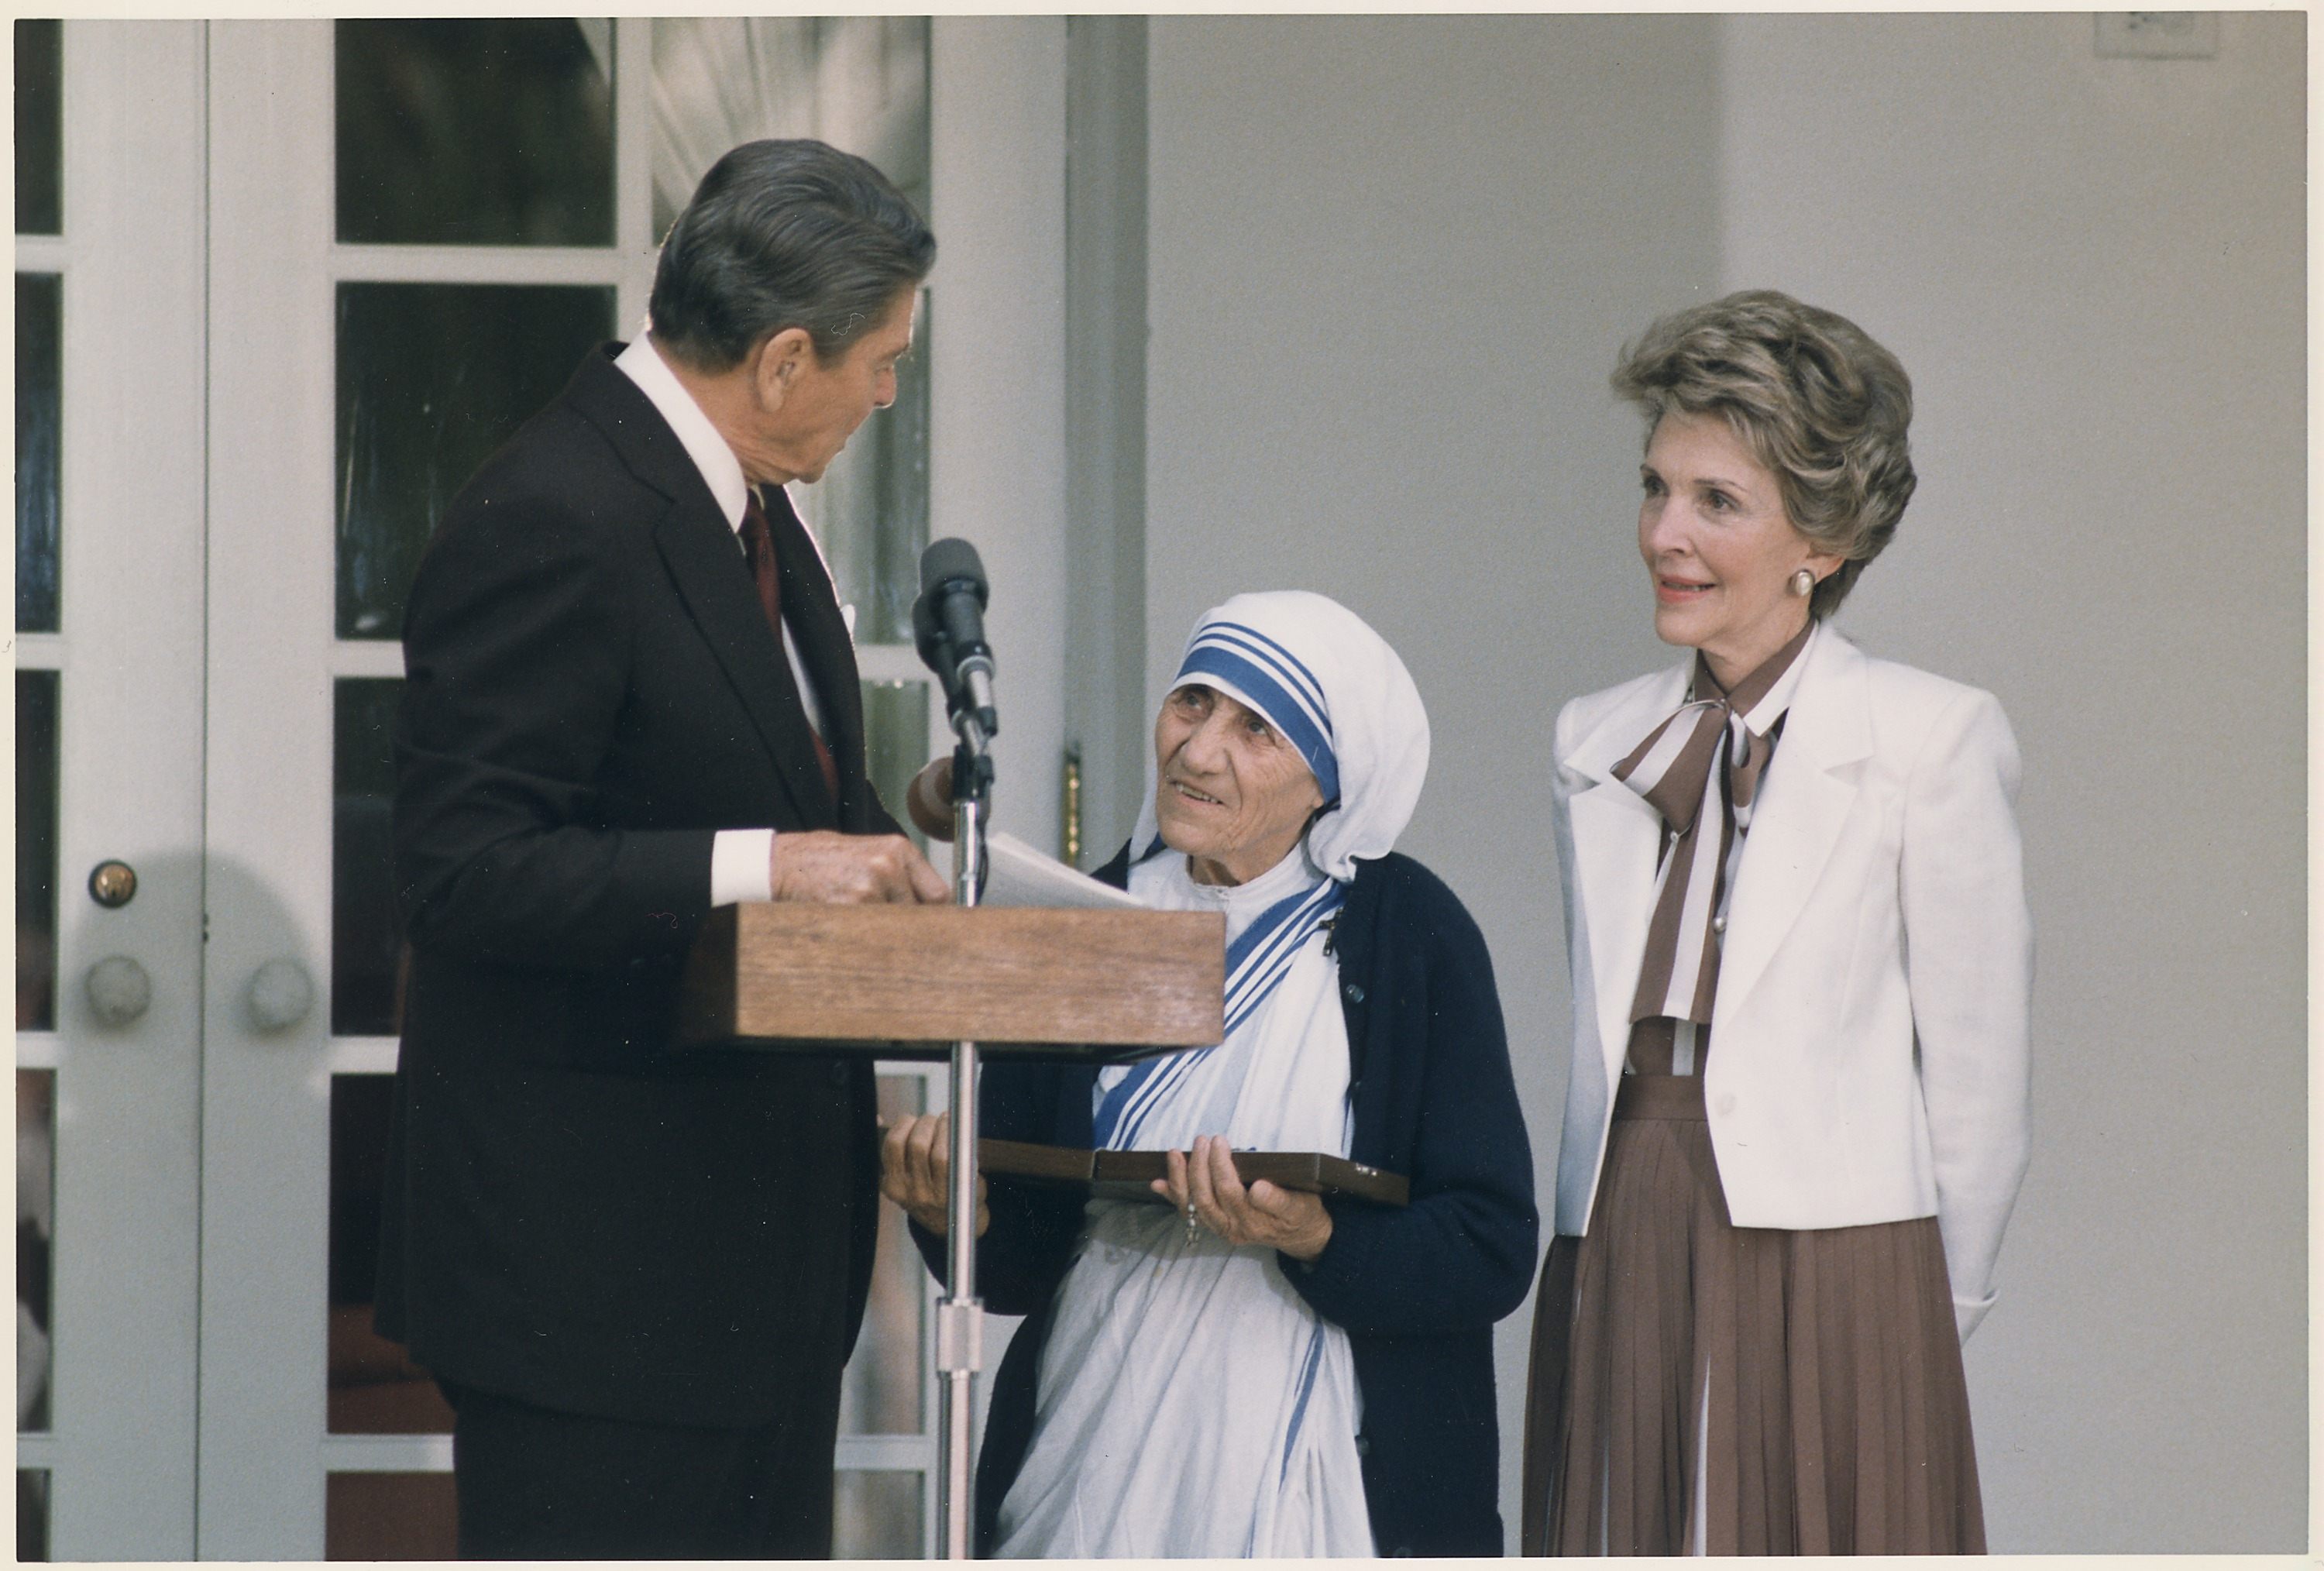 Photograph_of_The_Reagans_presenting_Mother_Teresa_with_the_Medal_of_Freedom_at_a_White_House_Ceremony_-_NARA_-_198564